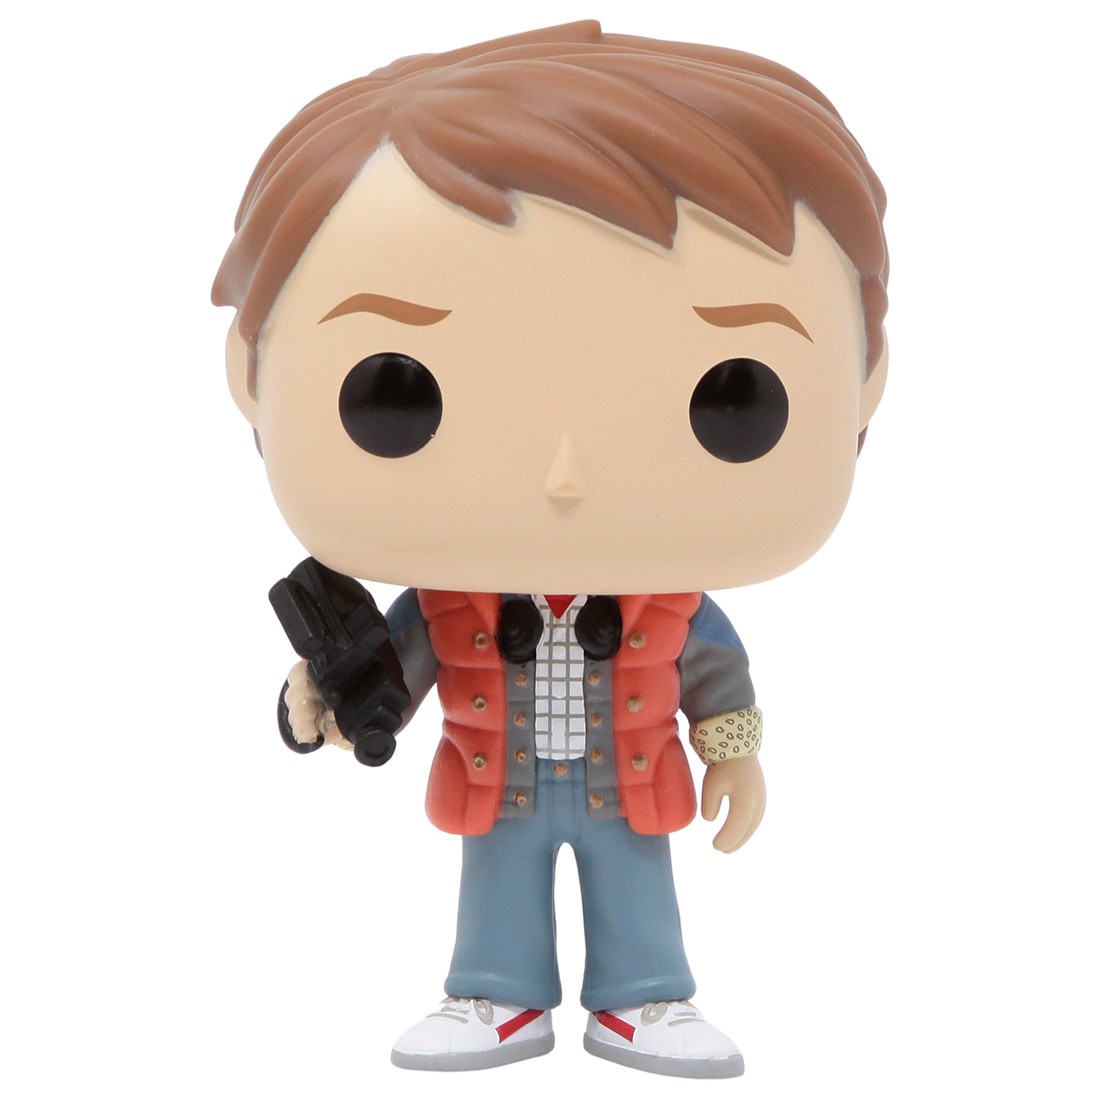 Marty McFly Puffy Vest Back to the Future Official Funko Pop Vinyl Figure 